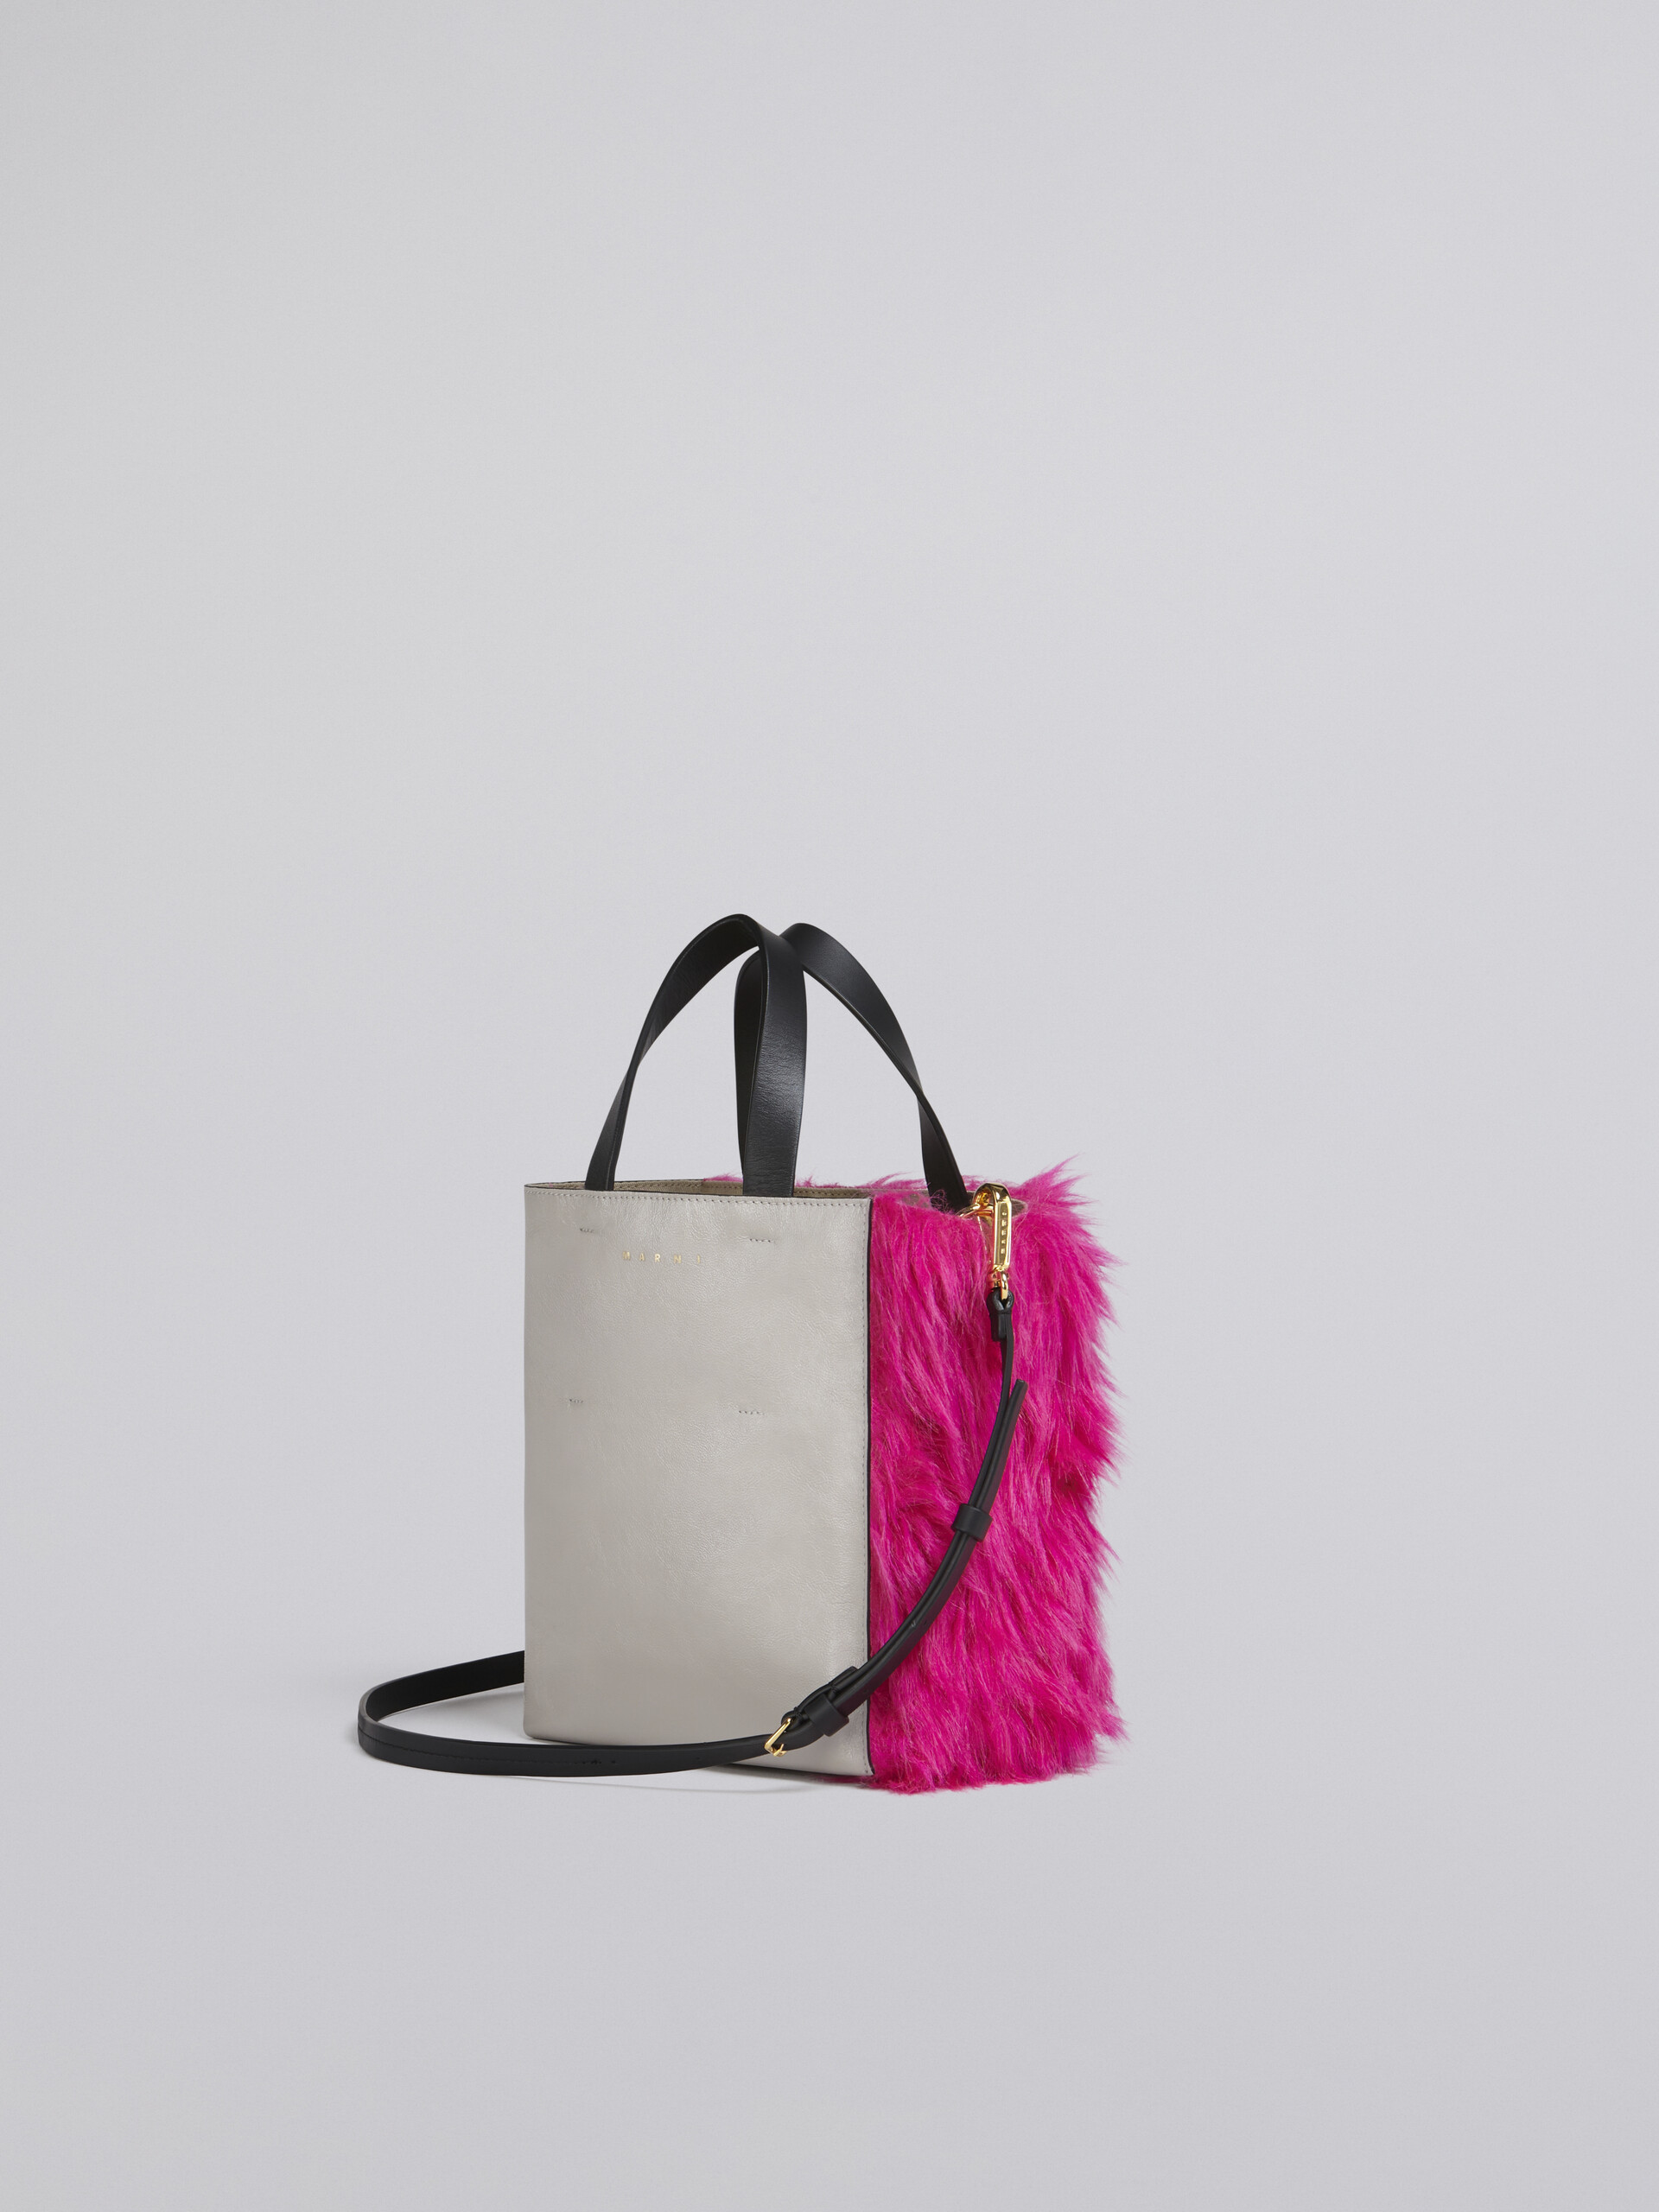 Teddy and calf leather MUSEO SOFT bag - Shopping Bags - Image 3